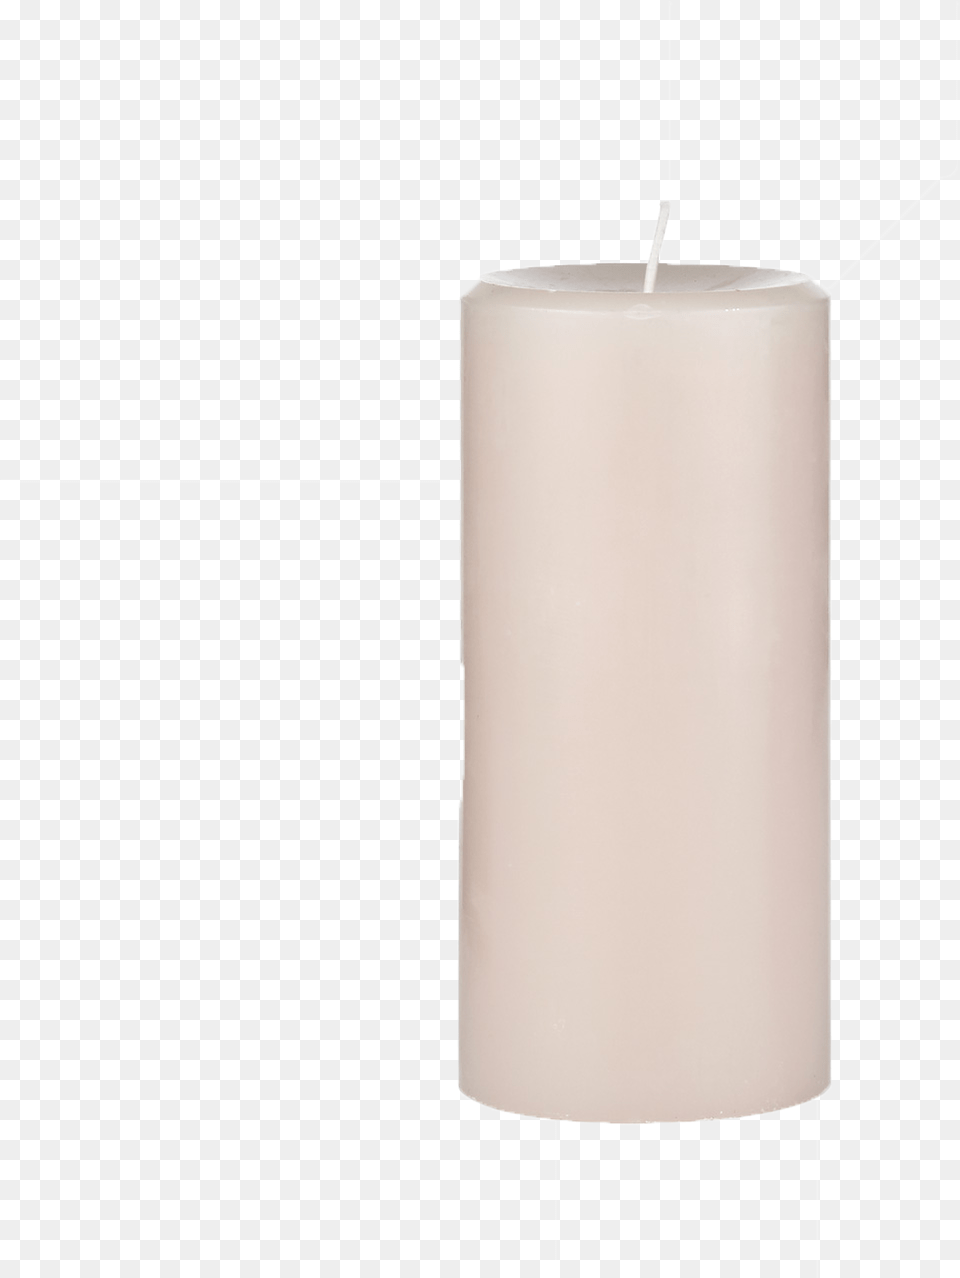 Candles Hd Images Unity Candle Free Transparent Png